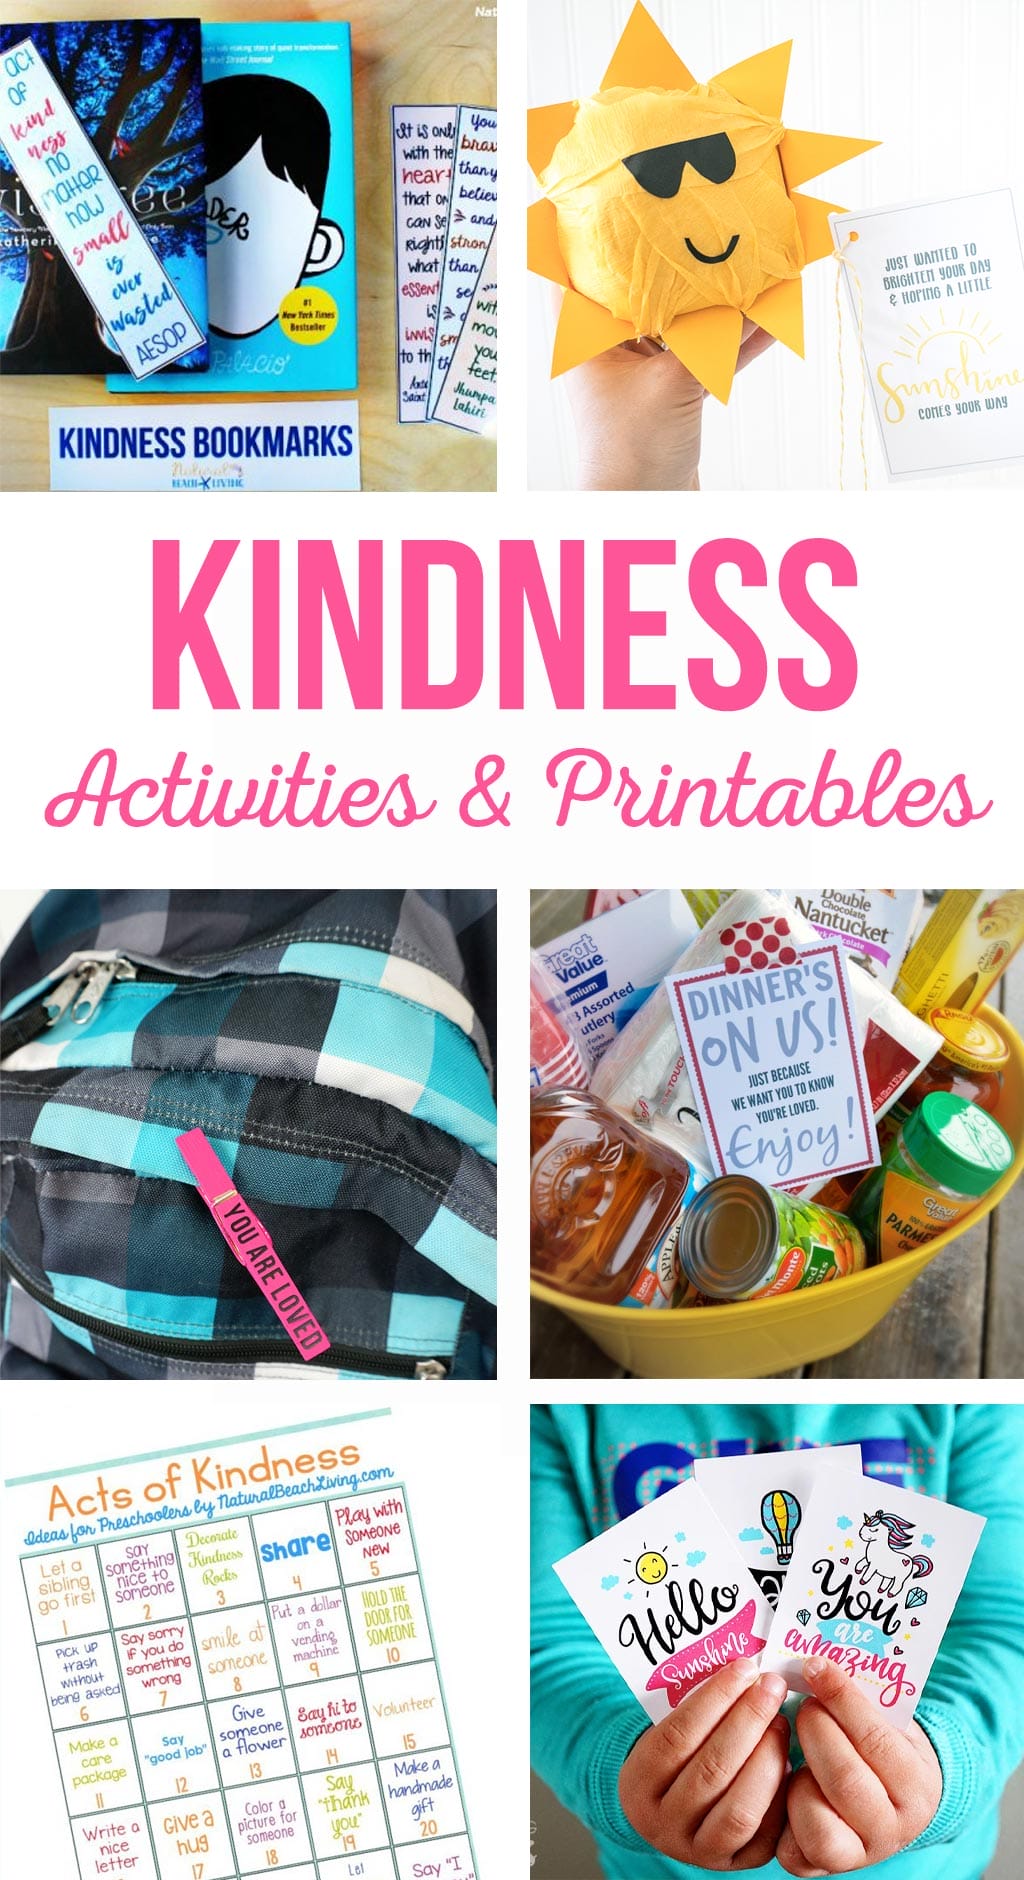 Random Act of Kindness | Activities and printables to help teach kindness. Simple activities that kids can do to spread happiness and serve others. #raok #kindness #bekind #activities #kids #printables 